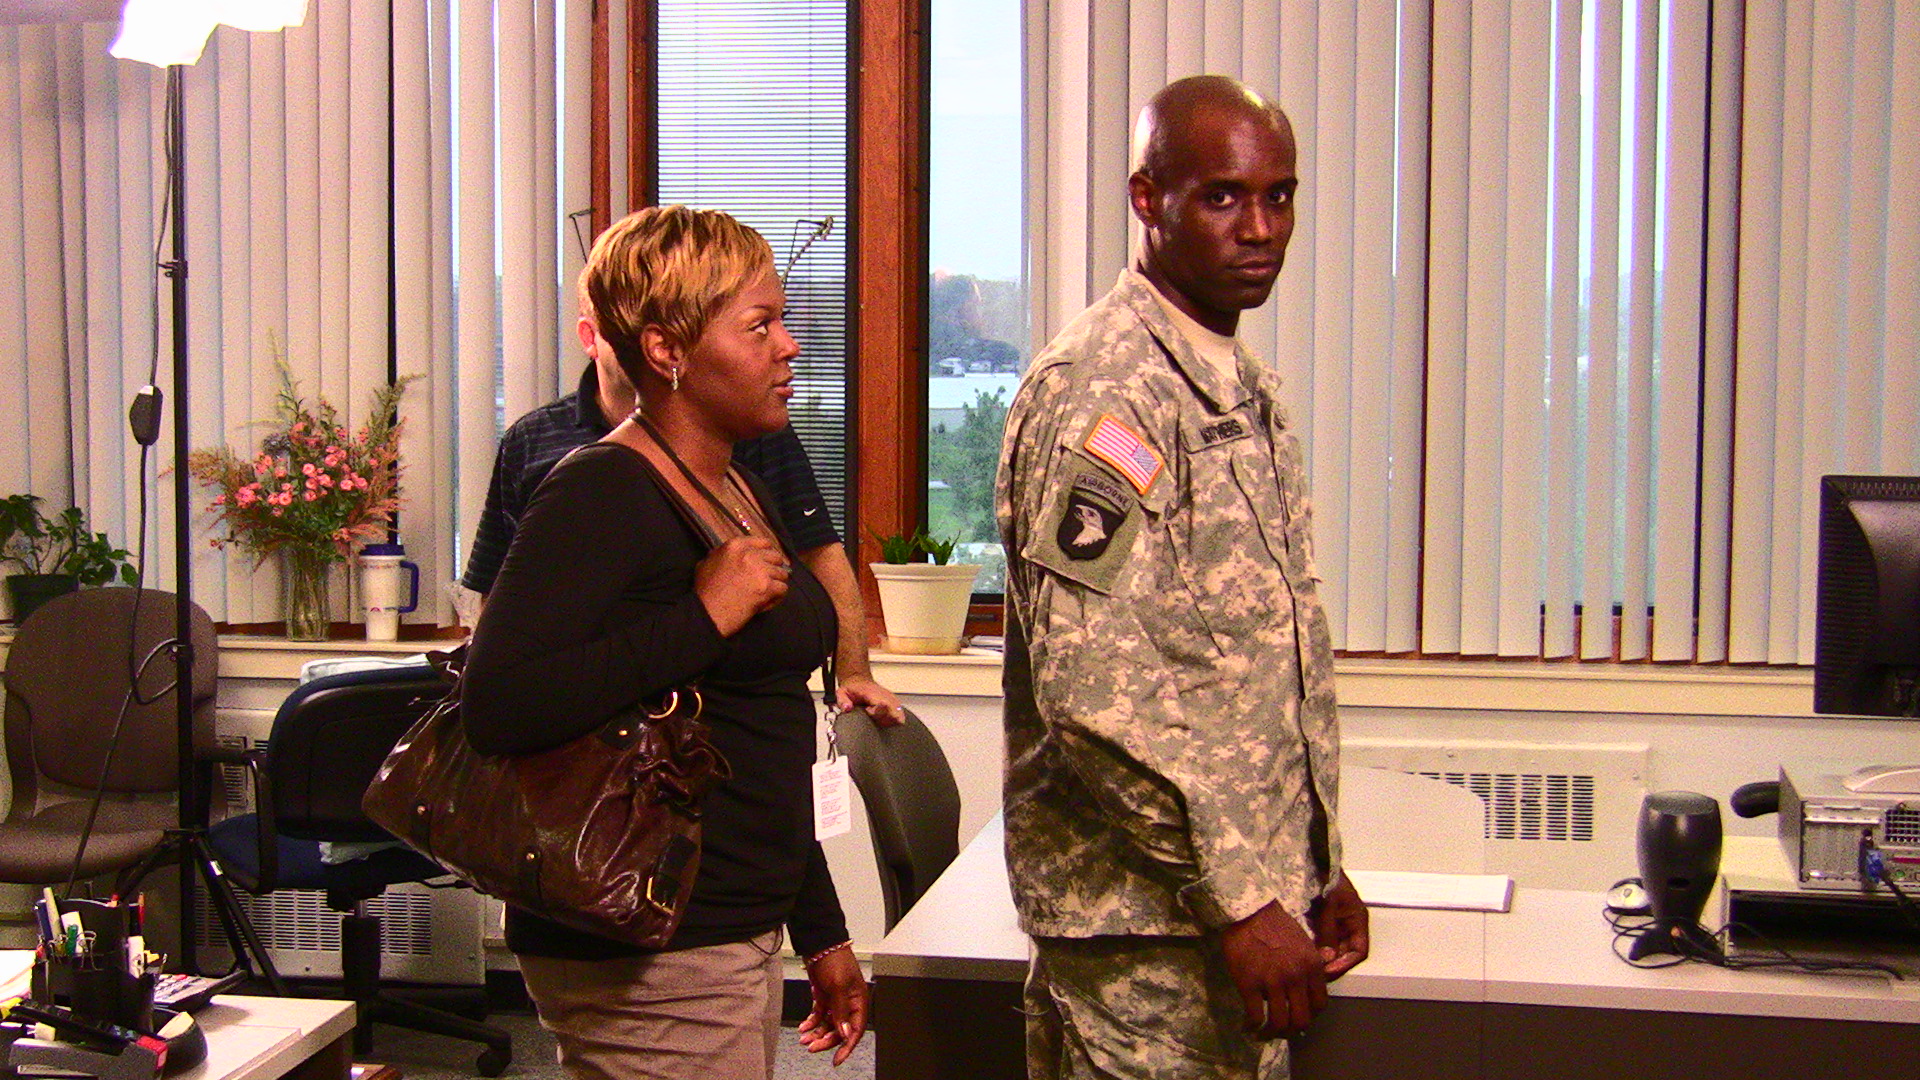 On set of 'WTU' US Army interactive film